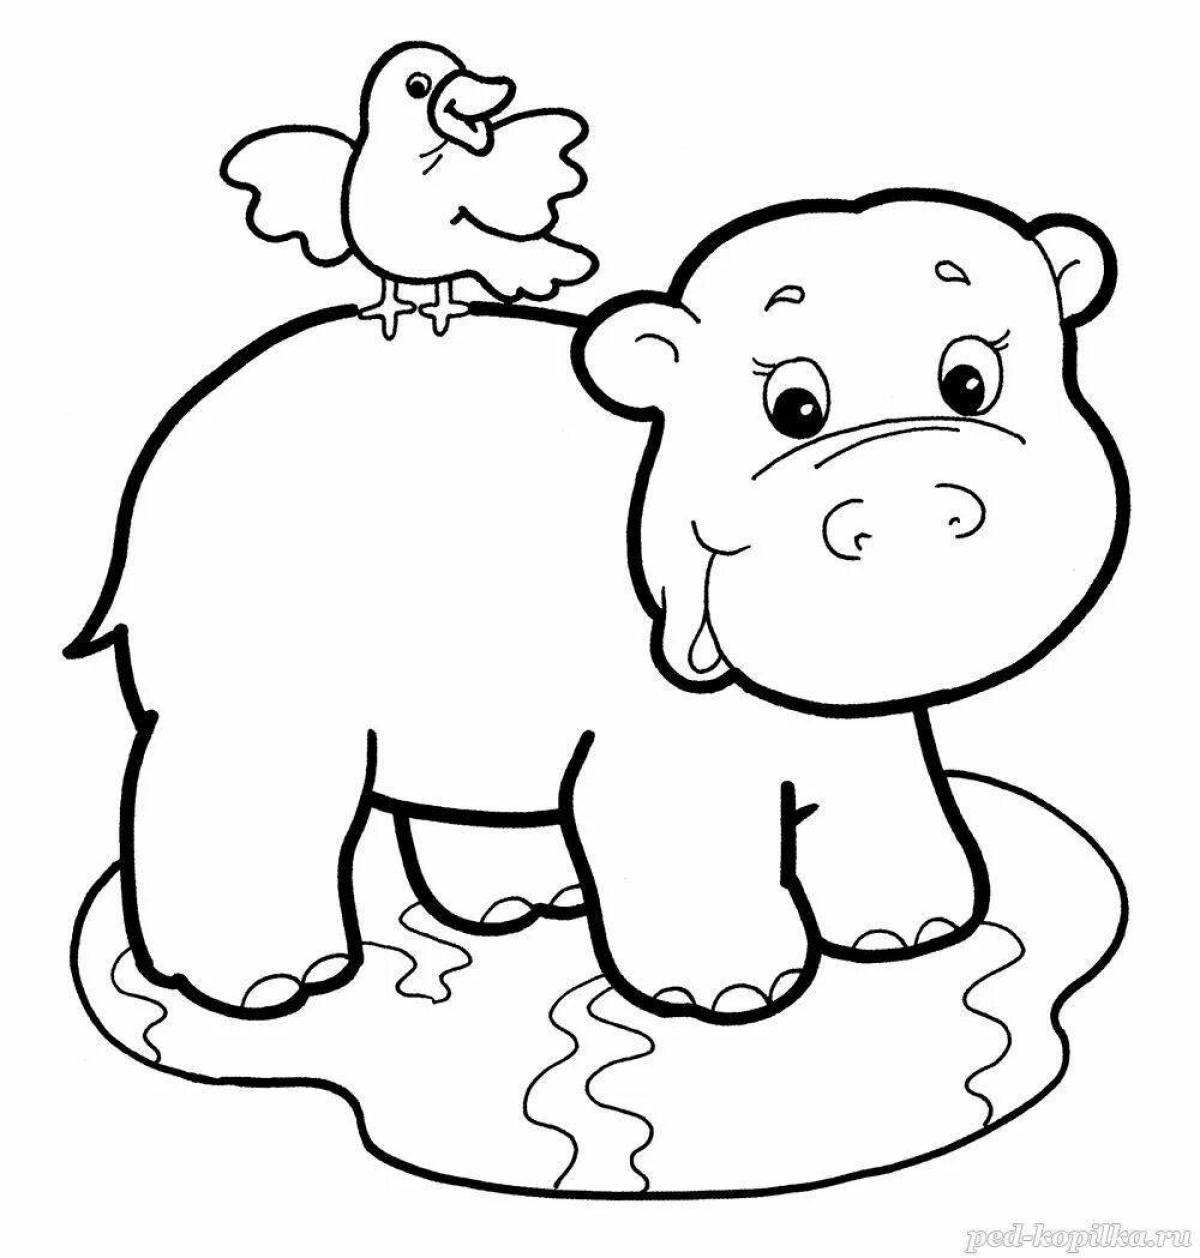 Outstanding animal coloring pages for 5 year olds